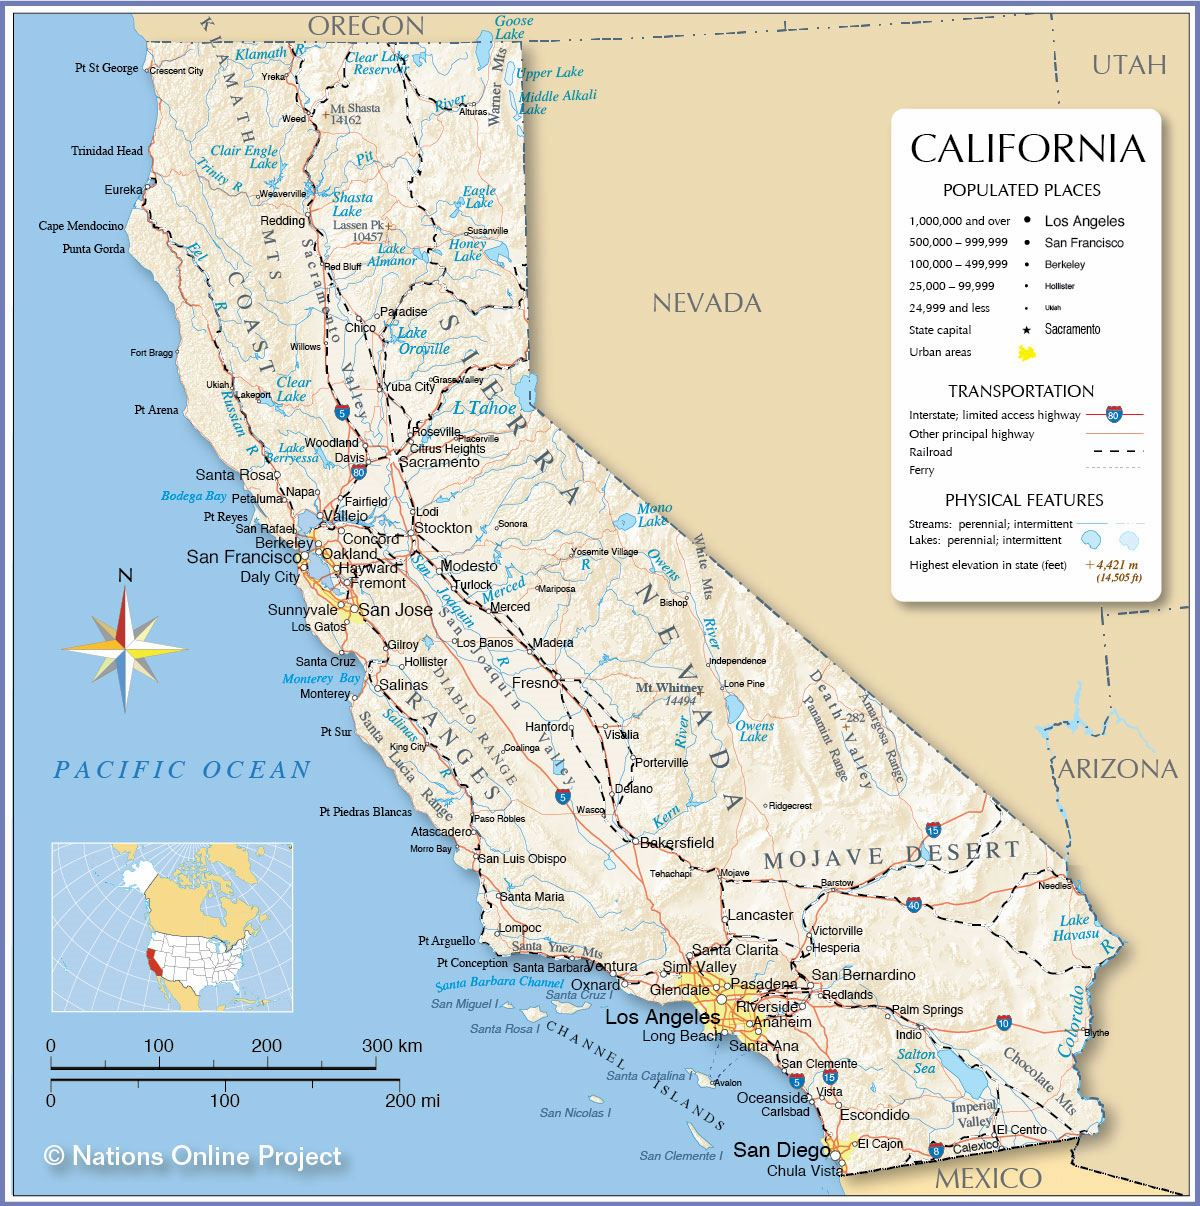 Large California Maps For Free Download And Print | High-Resolution - California Highway 1 Map Pdf